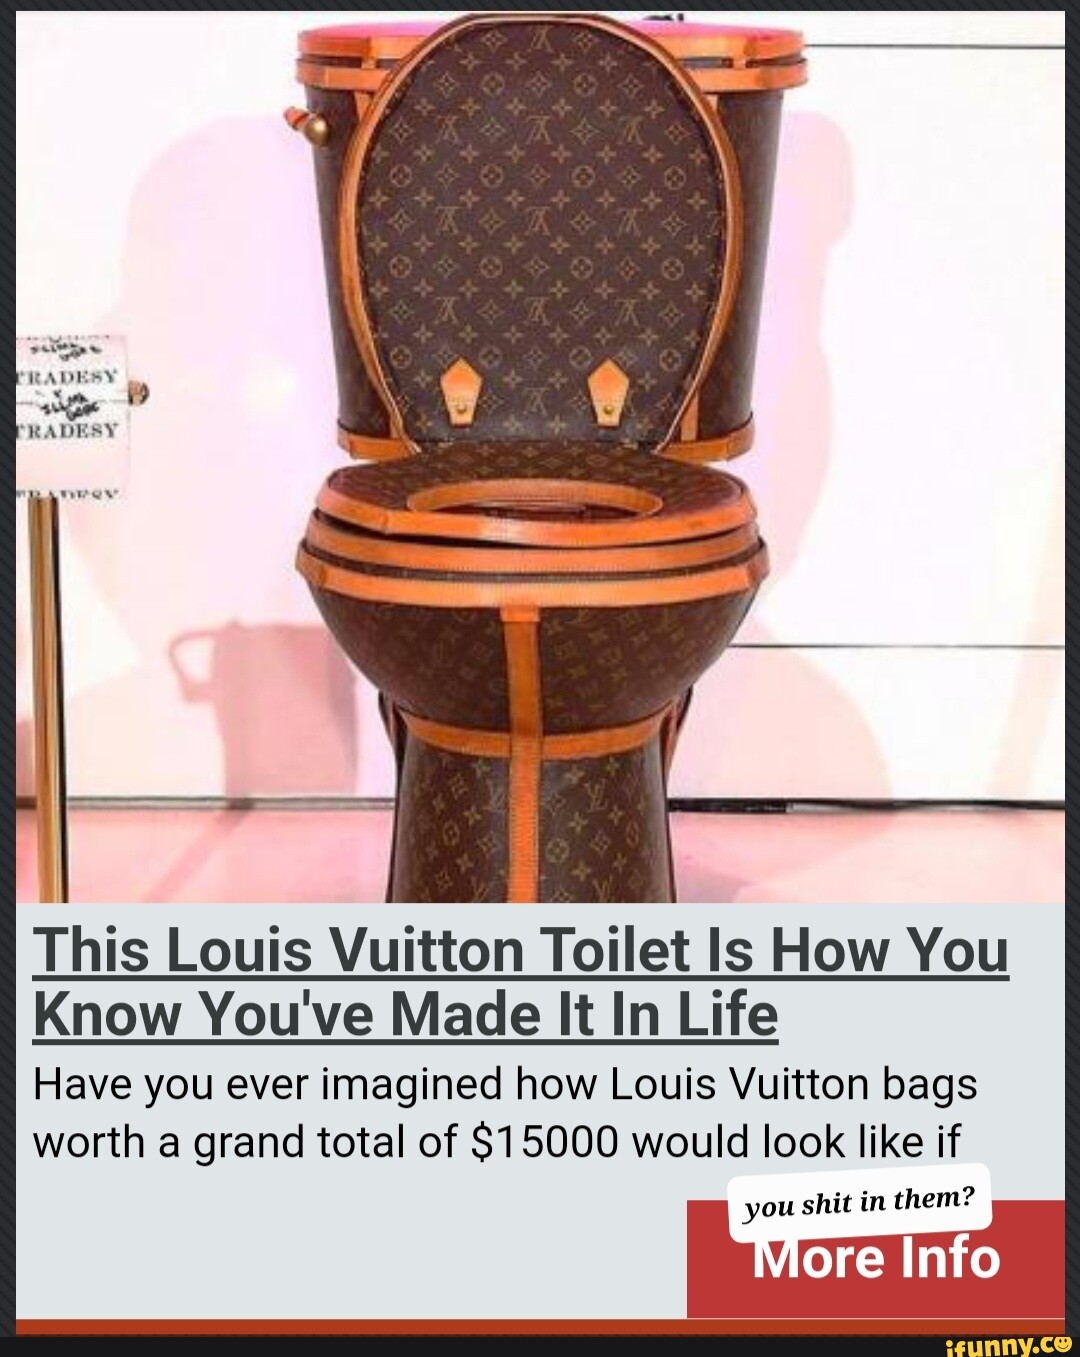 PRADESY This Louis Vuitton Toilet Is How You Know You've Made It In Life  Have